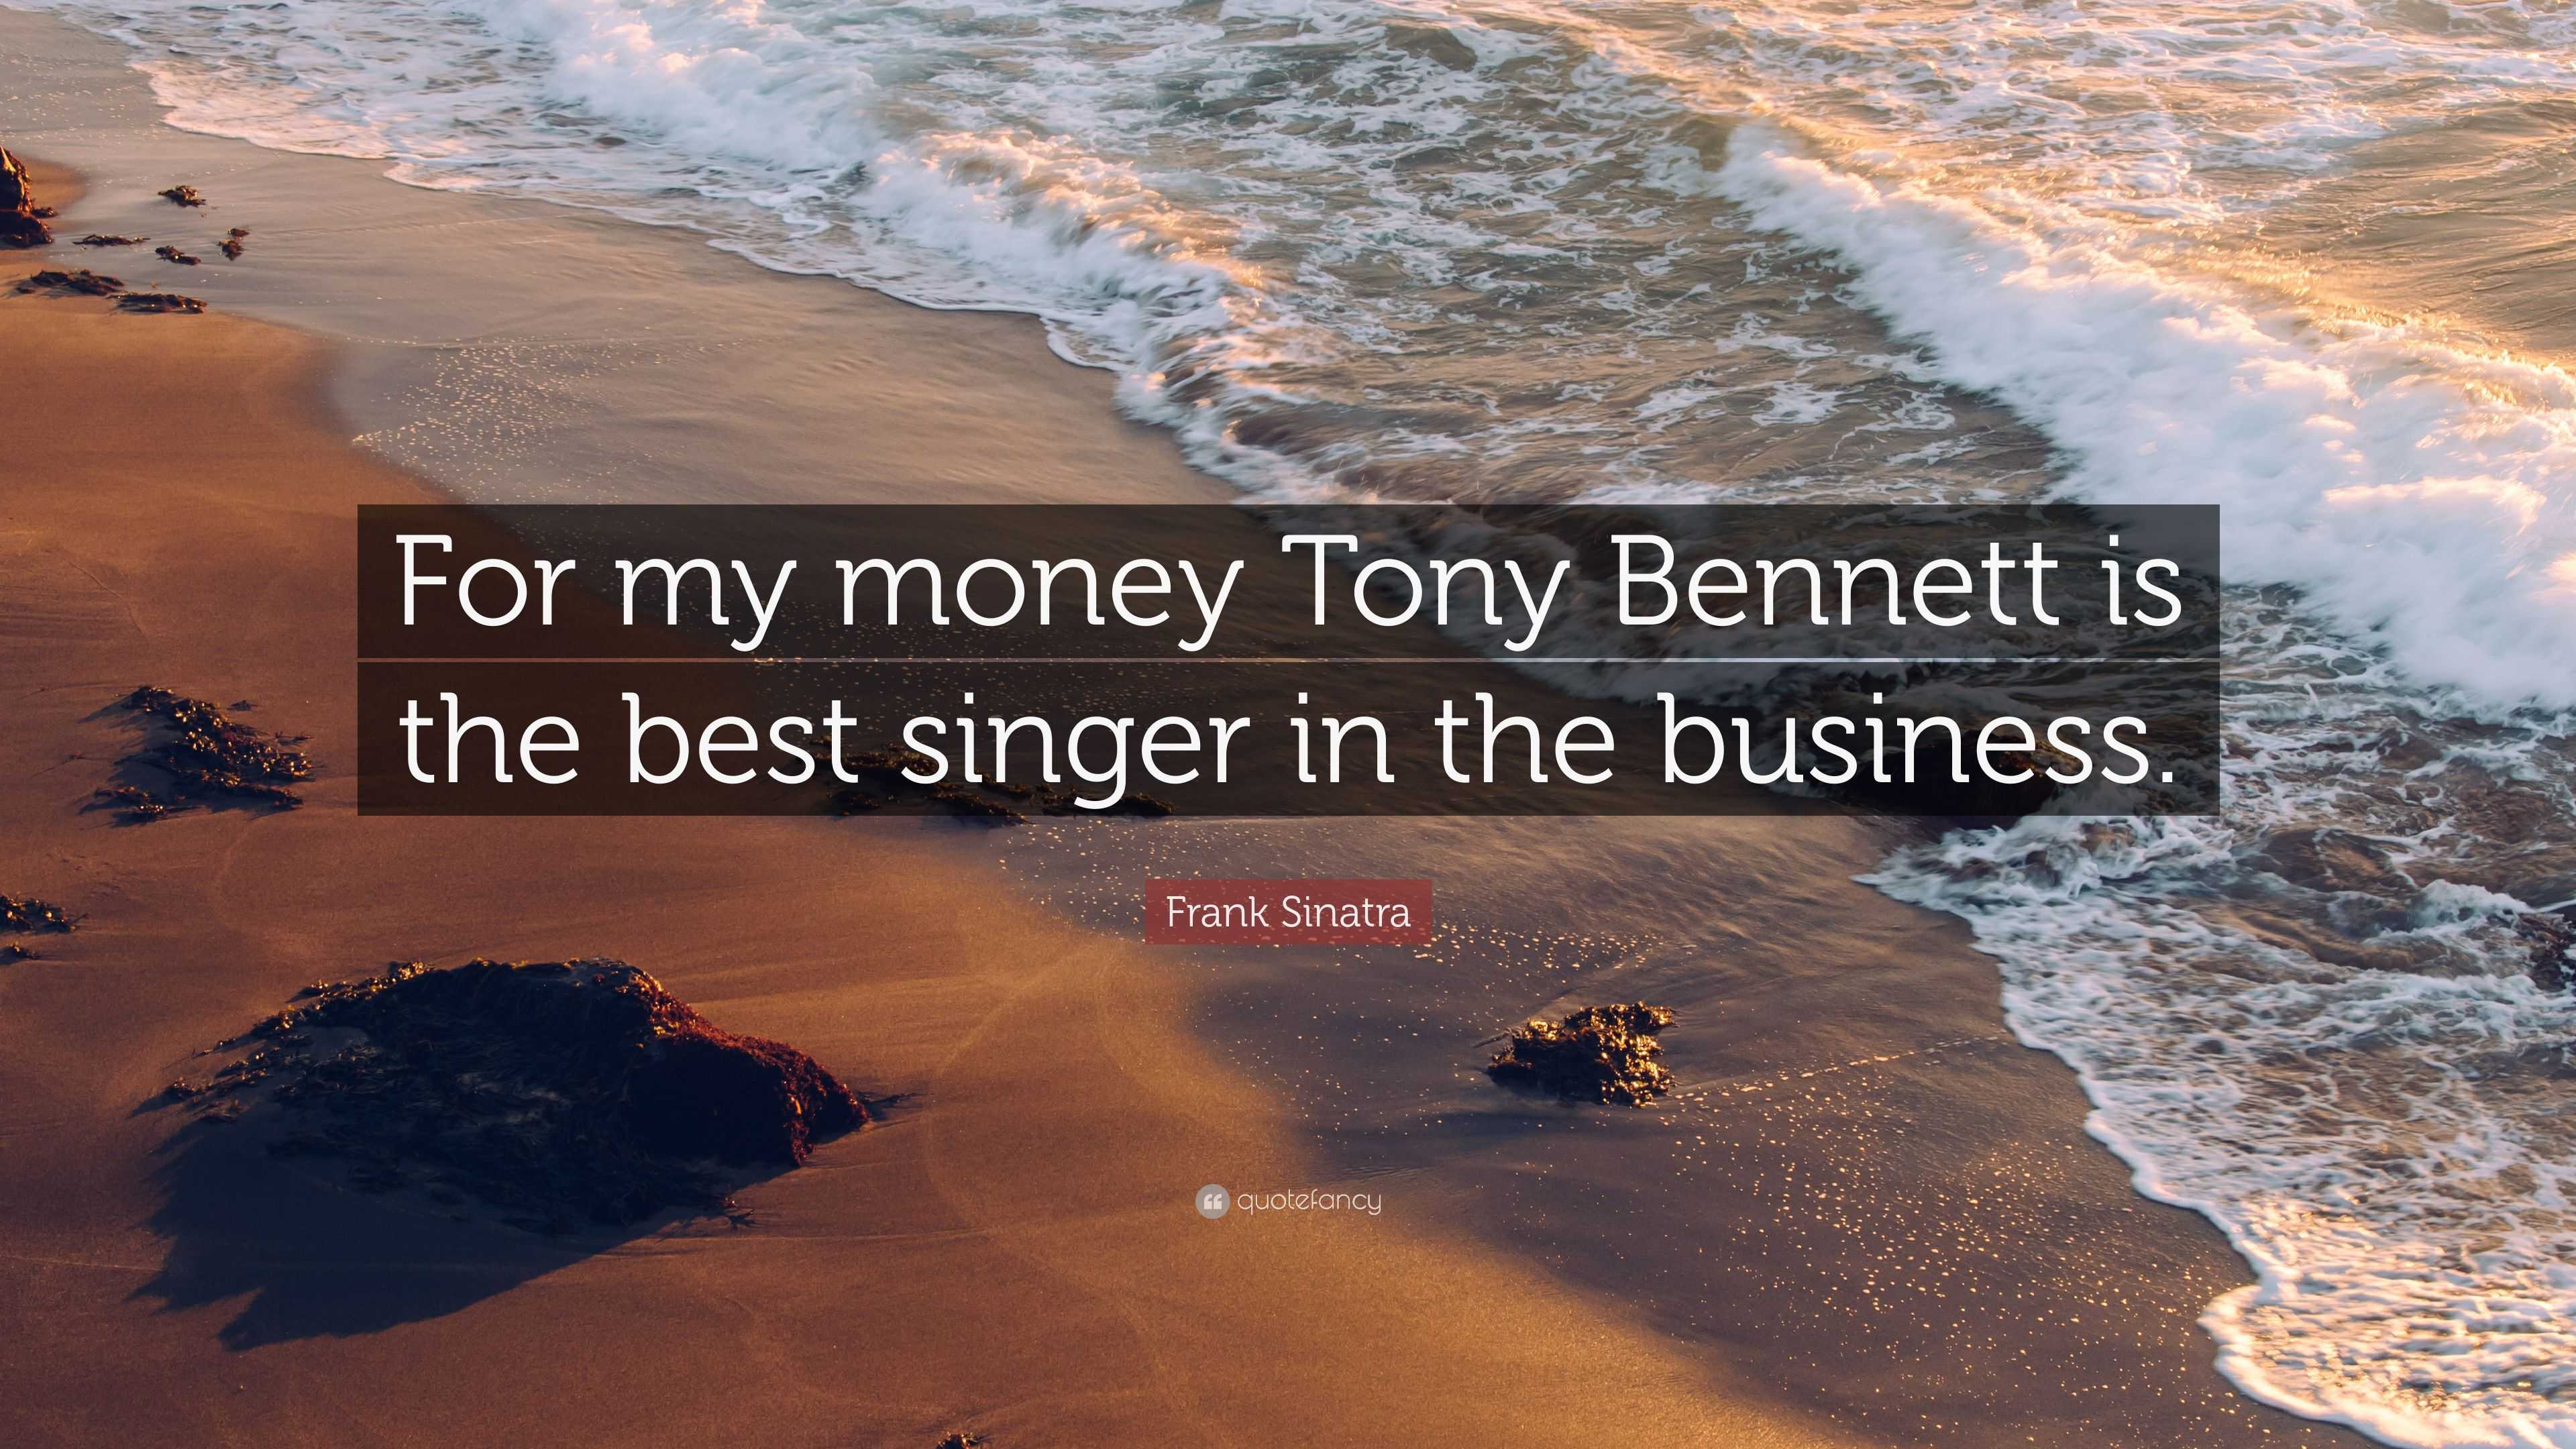 The Best Print Printable Art The Best Is Yet to Come Frank Sinatra Download Tony Bennett FRANK SINATRA QUOTE